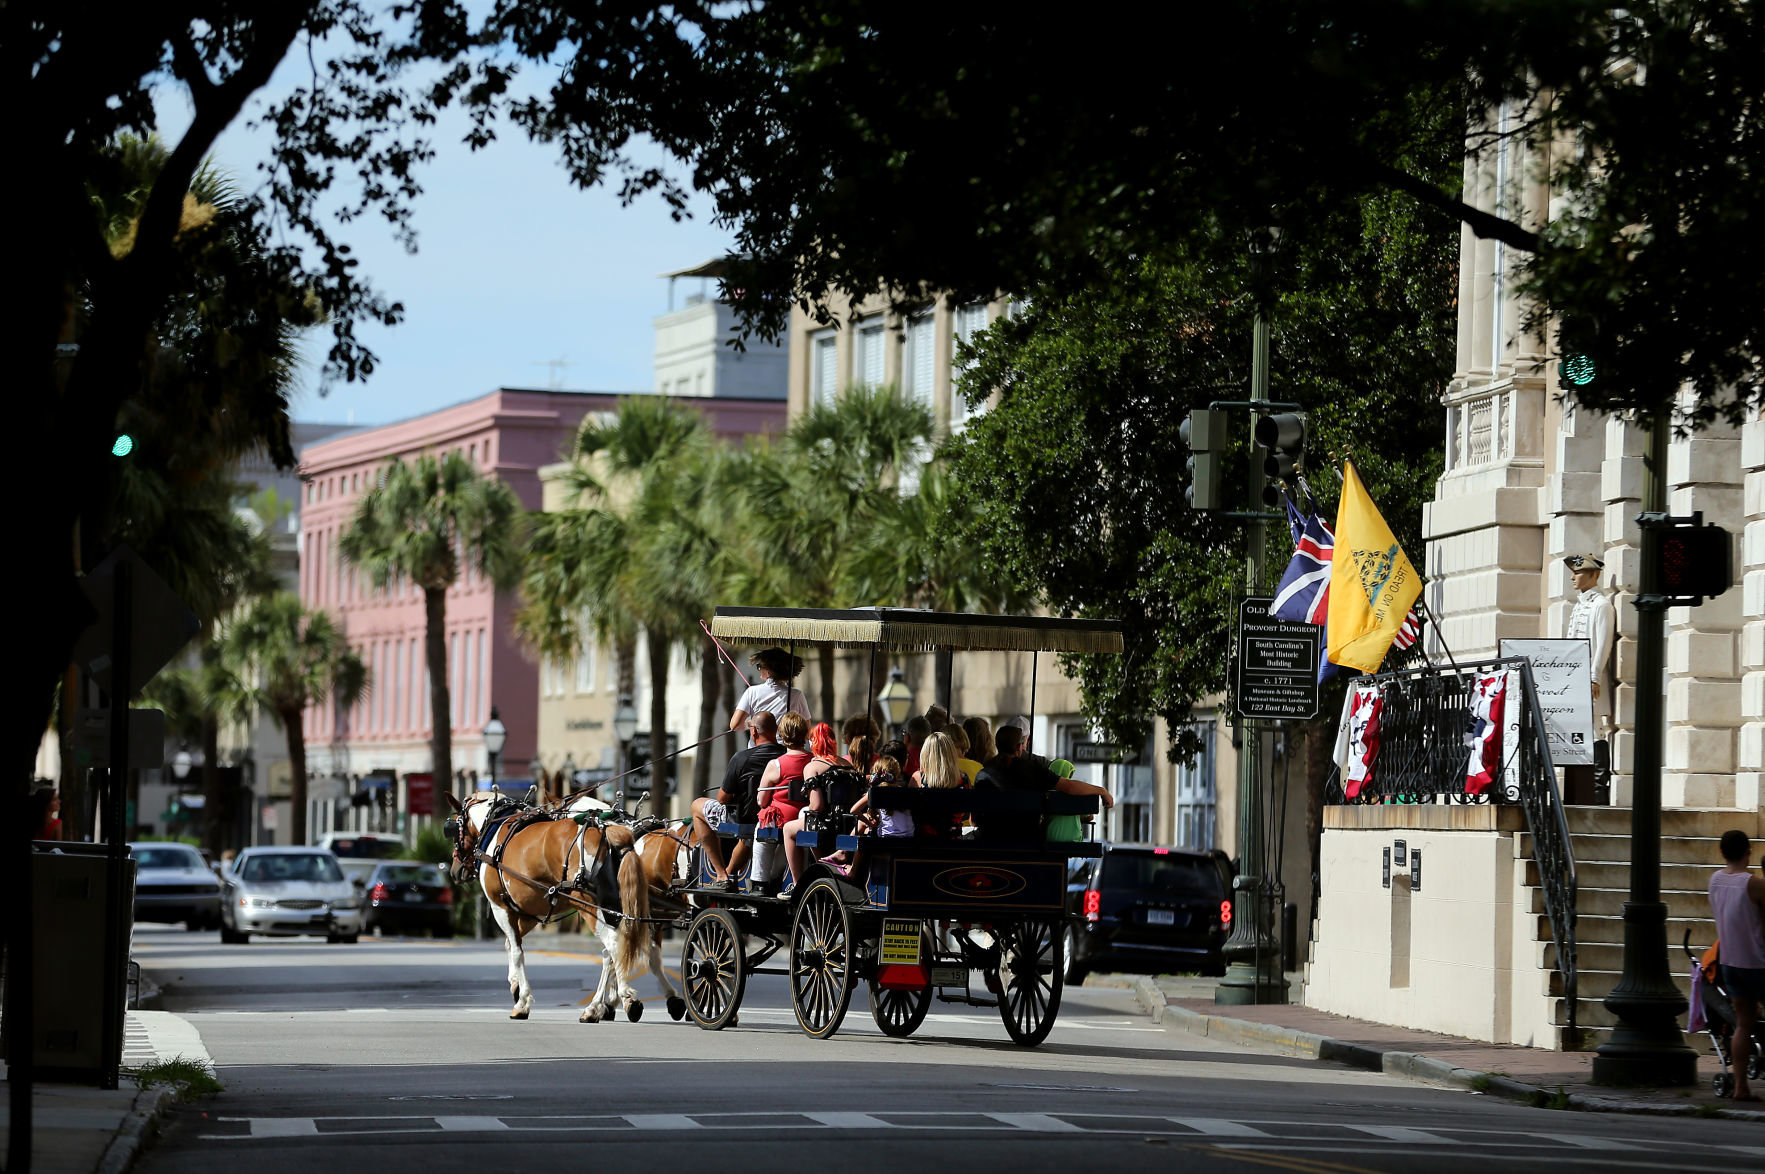 A horse carriage takes visitors past the Old Exchange Building in Charleston in 2018. Readers of Travel + Leisure magazine have picked Charleston for the top spot in The Top 15 Cities in the United States for several years.